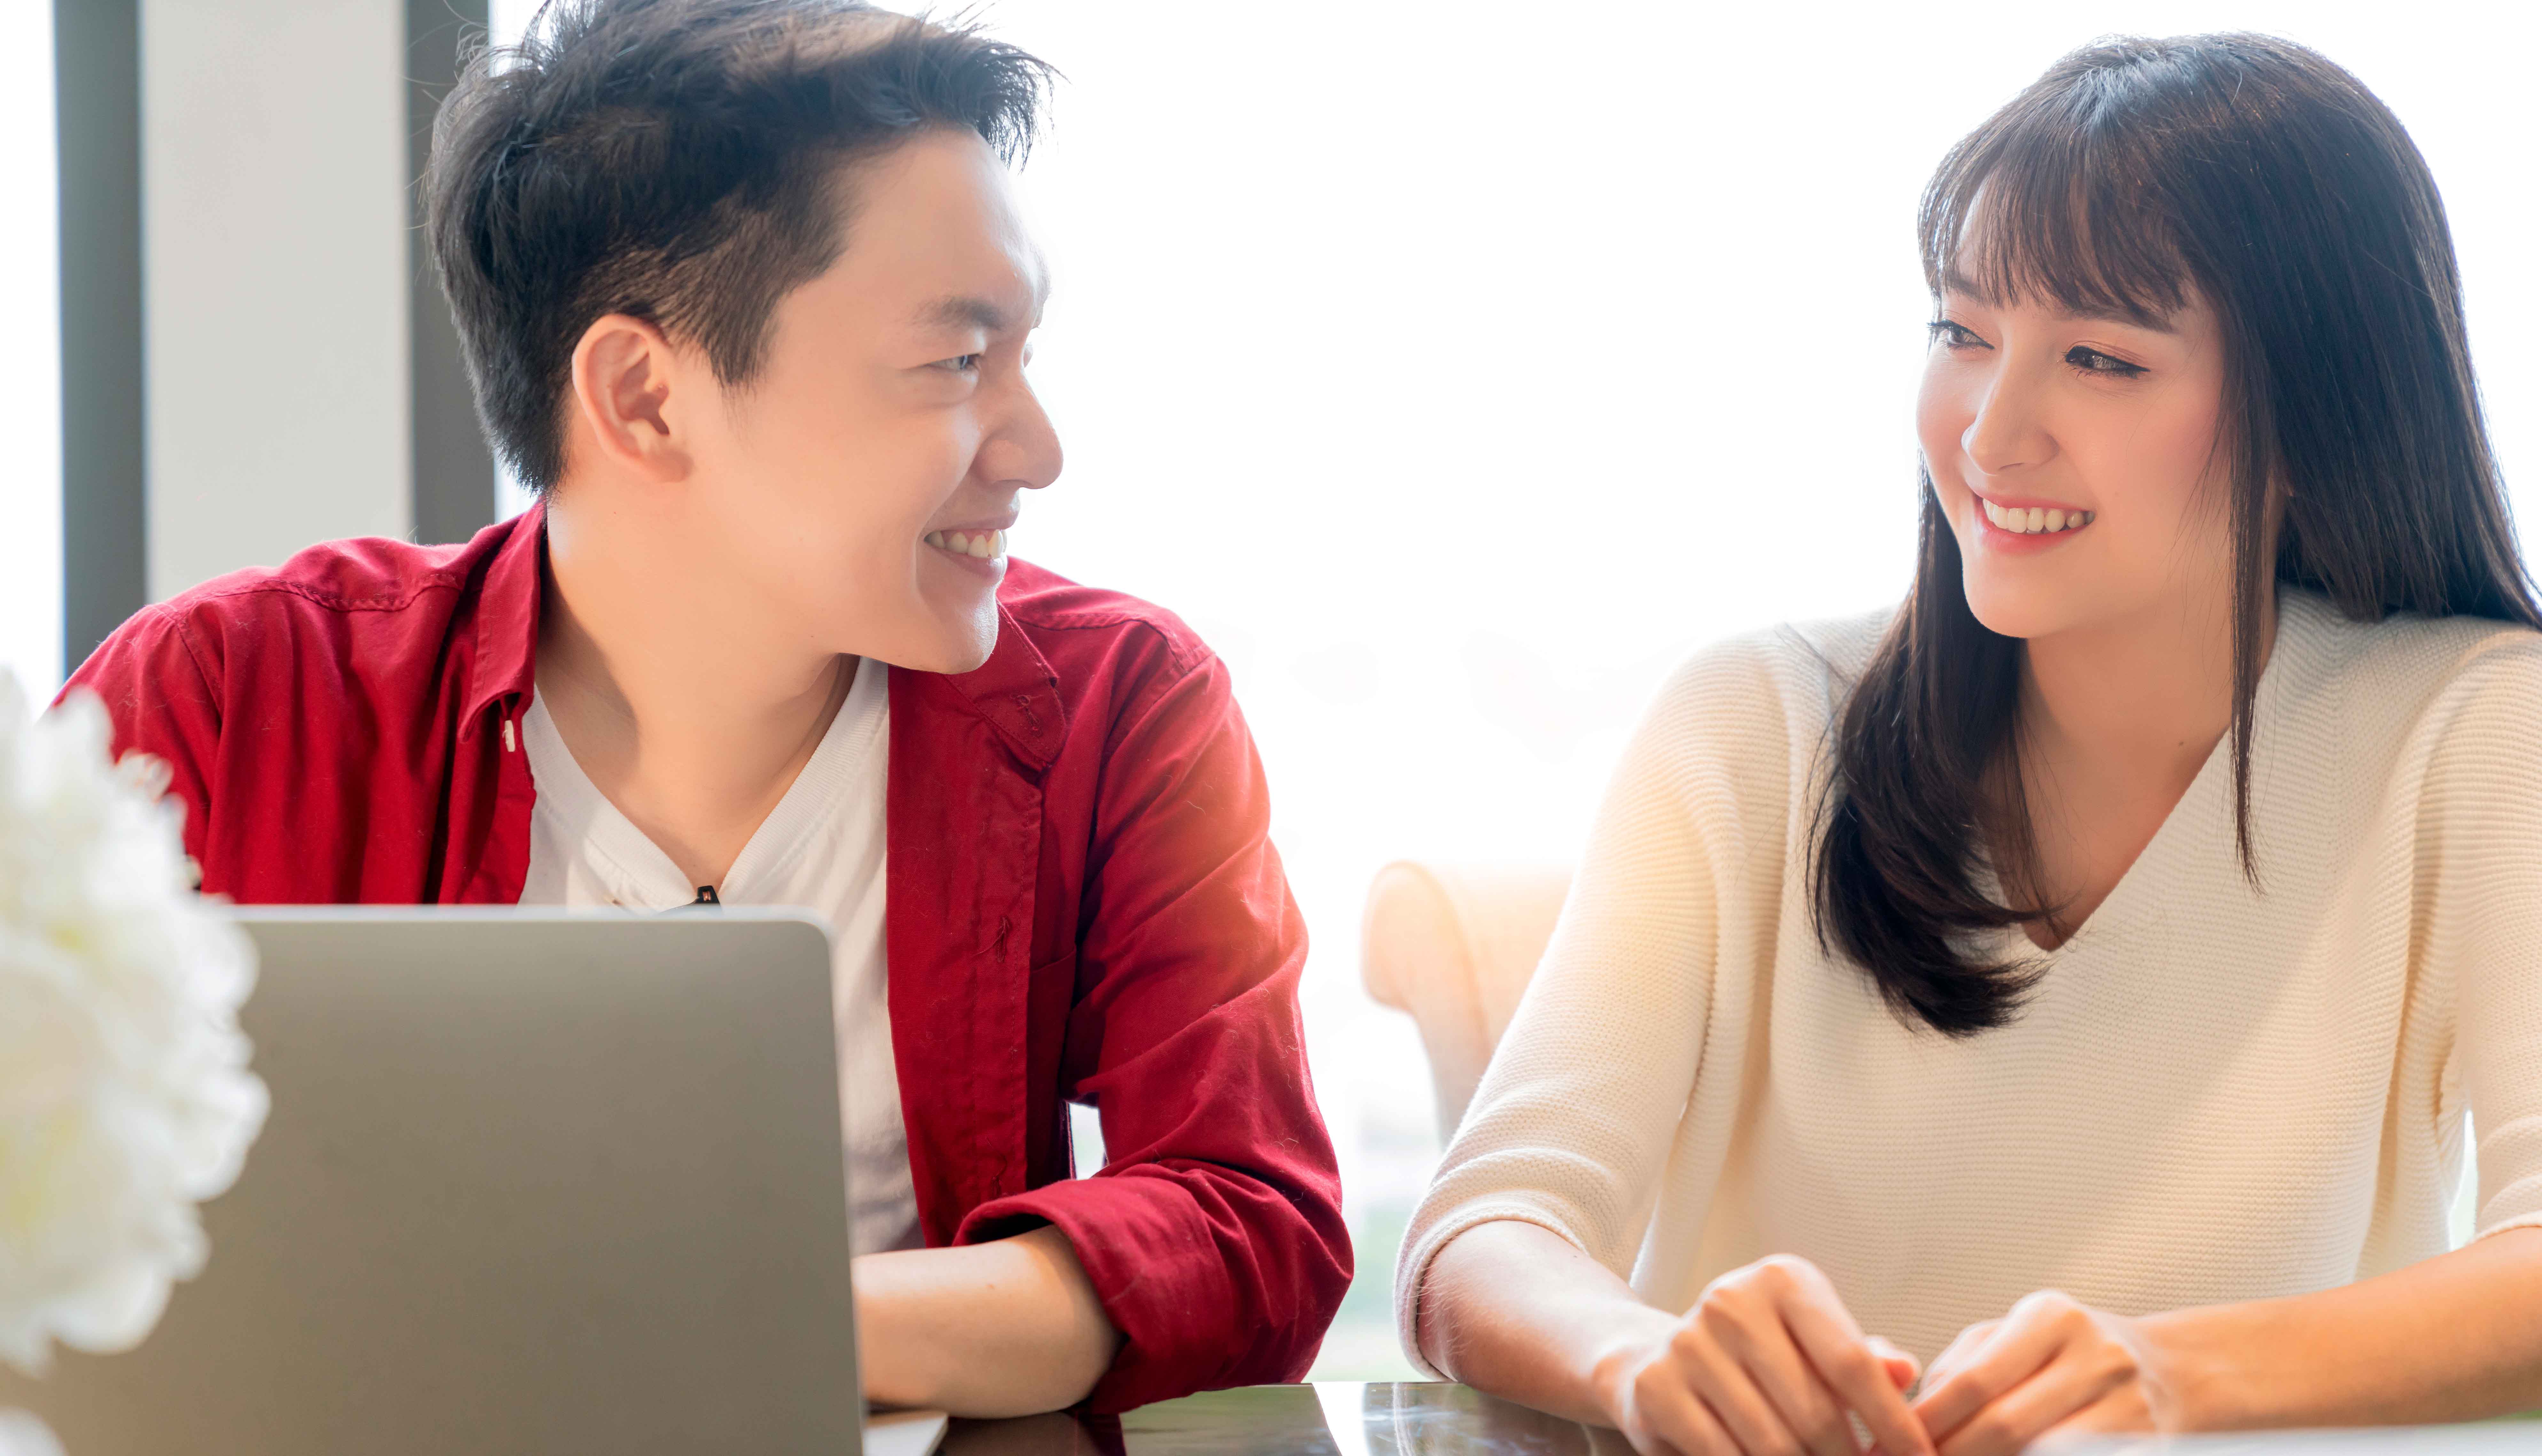 Asian couple discussing unsecured loans at the kitchen table together smiling.